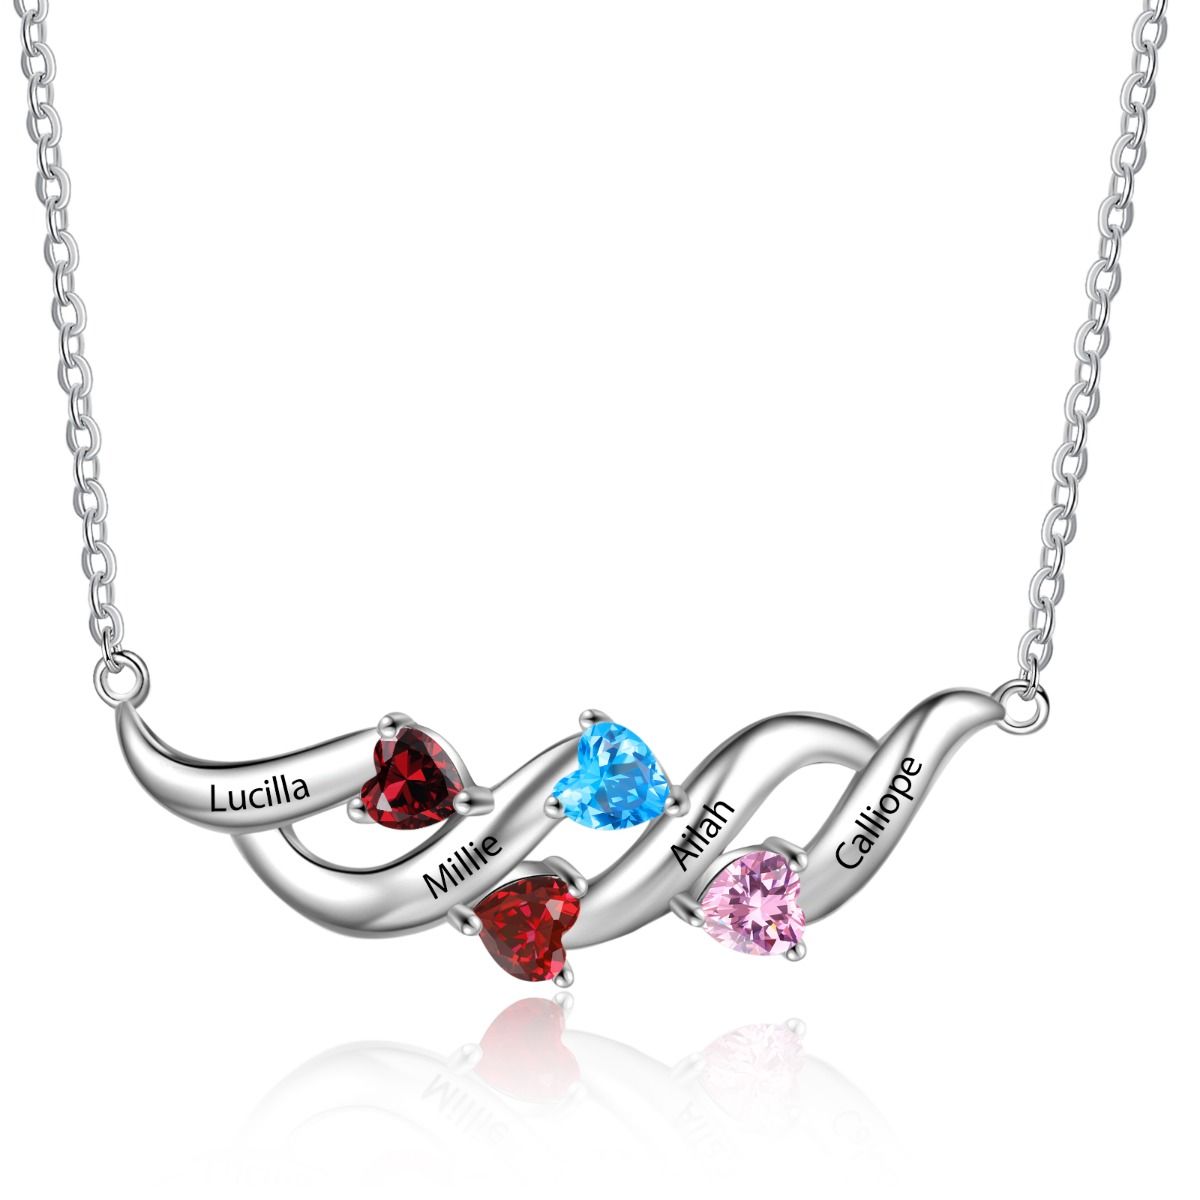 Bespoke Necklace For Her | Customised Up To 4 Birthstones Necklace With Engraved Names